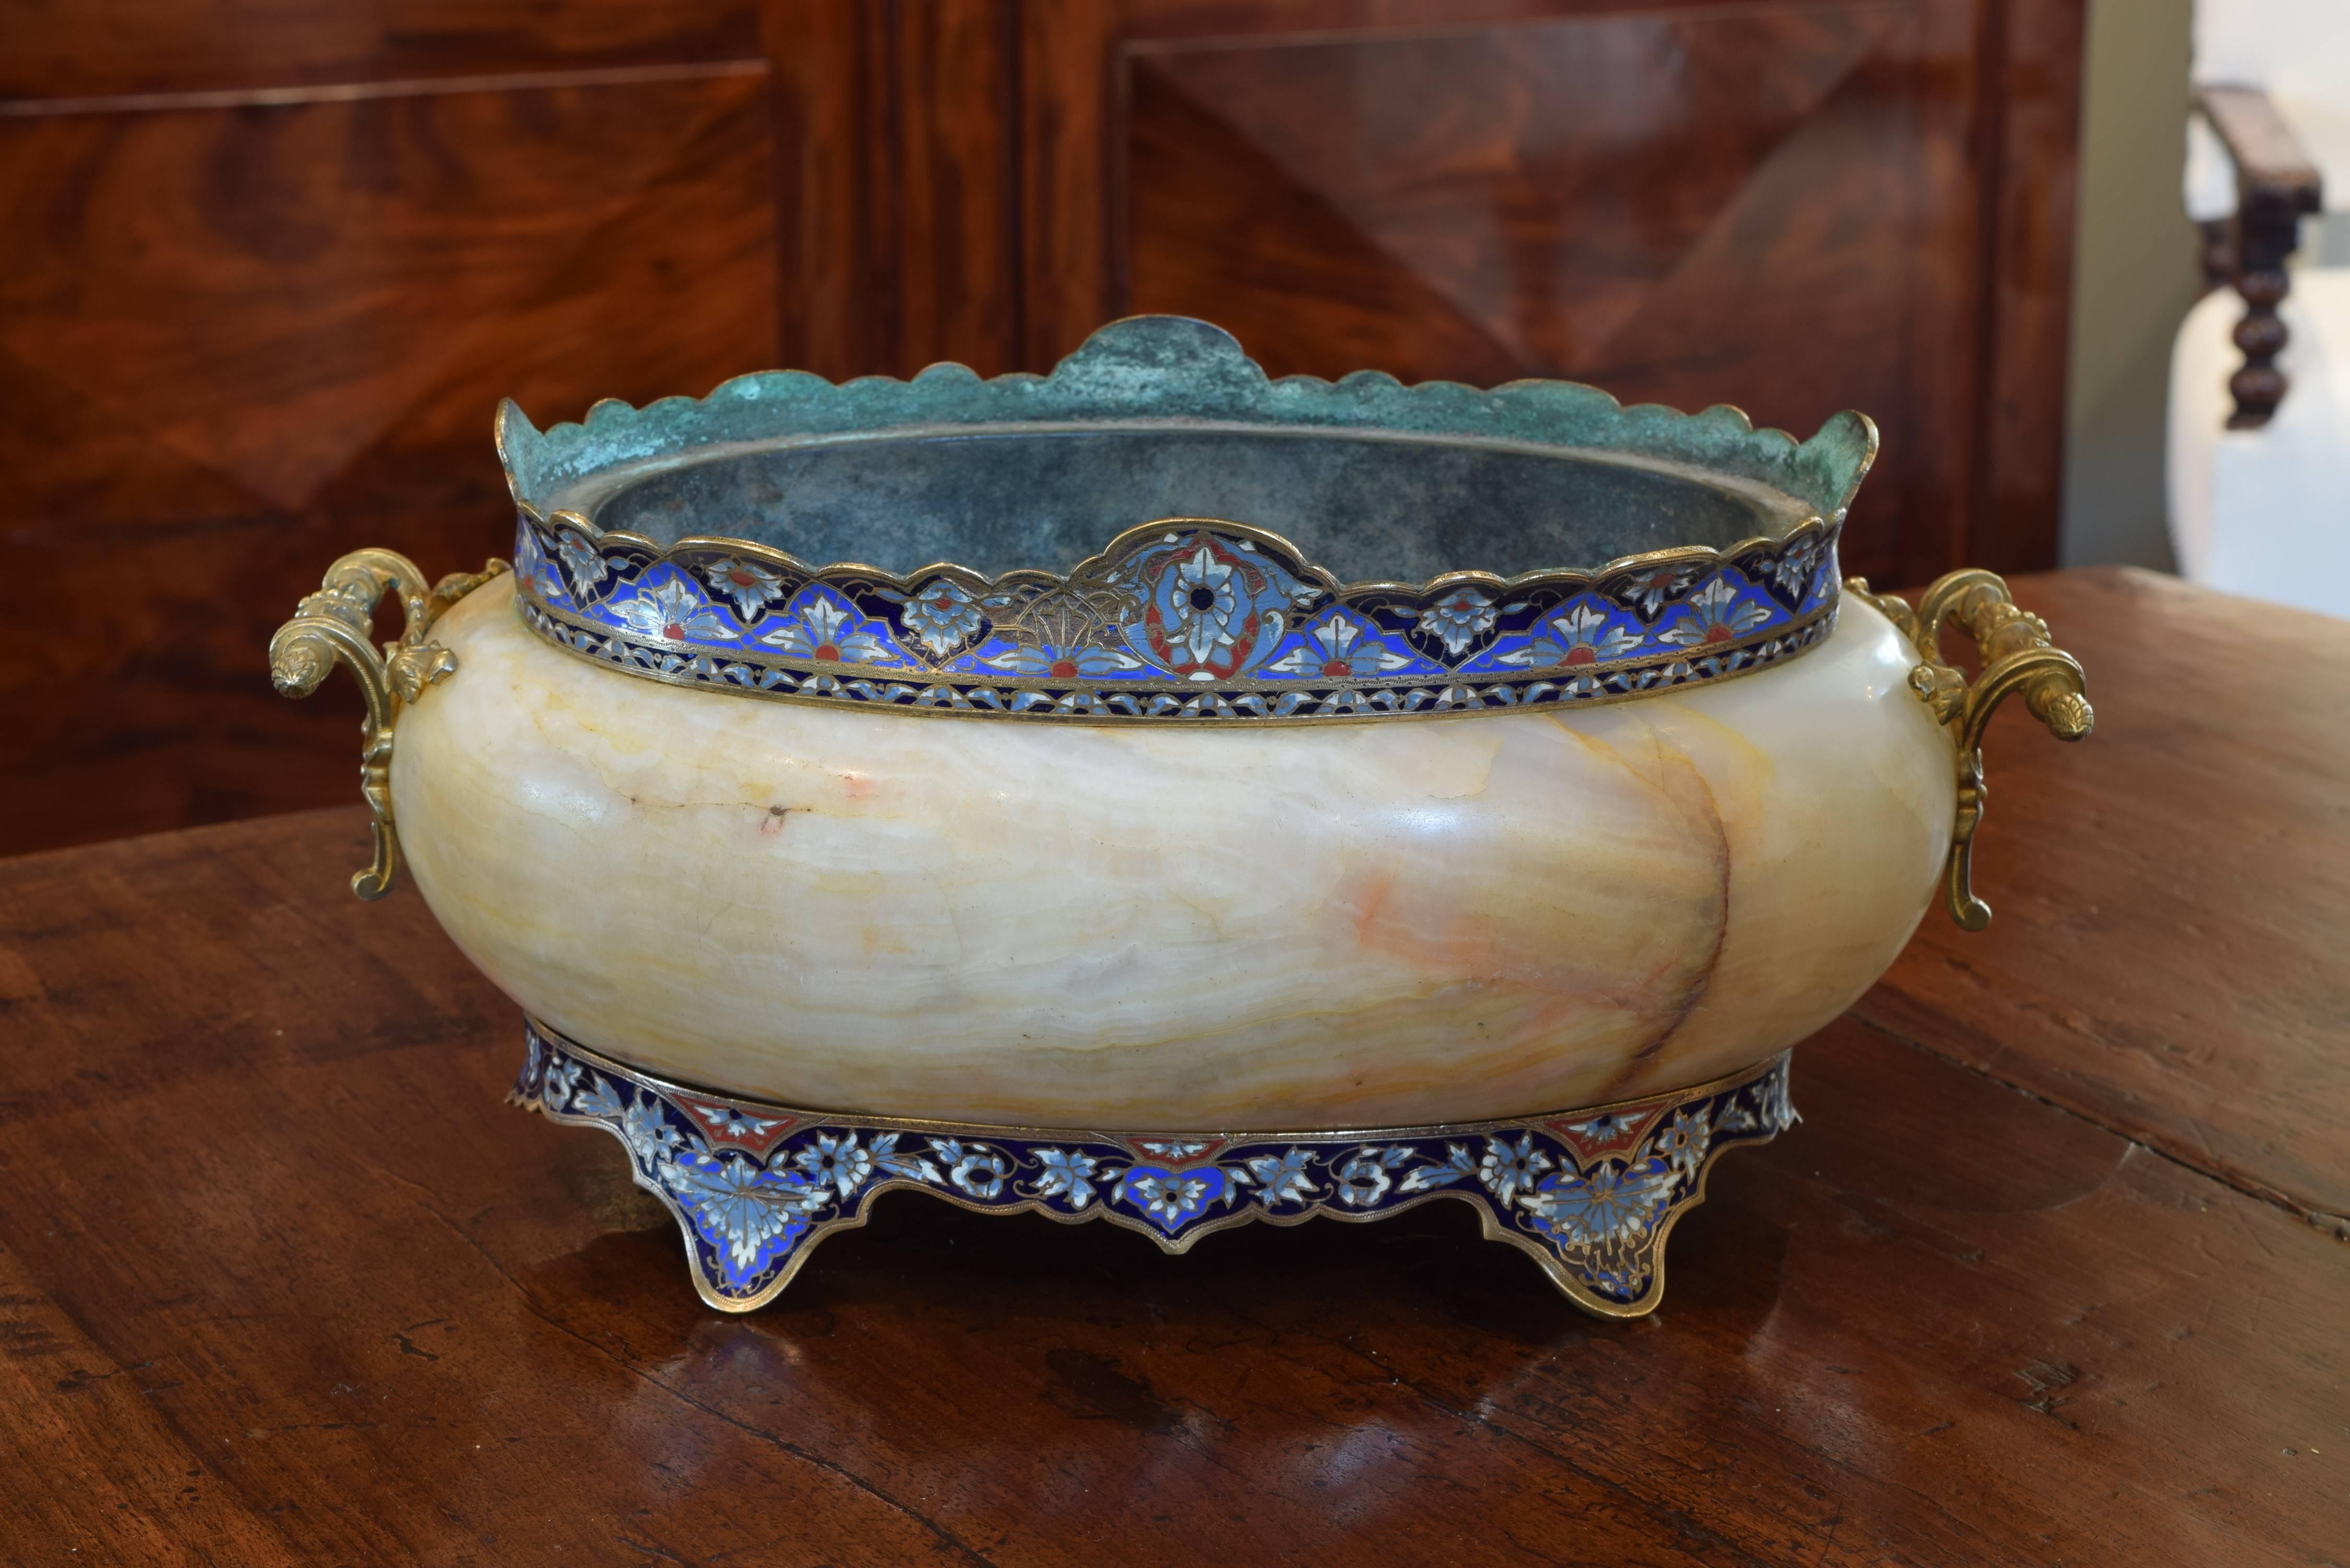 Having upper and lower shaped bands of cloisonne, with a tole liner, bronze handles.